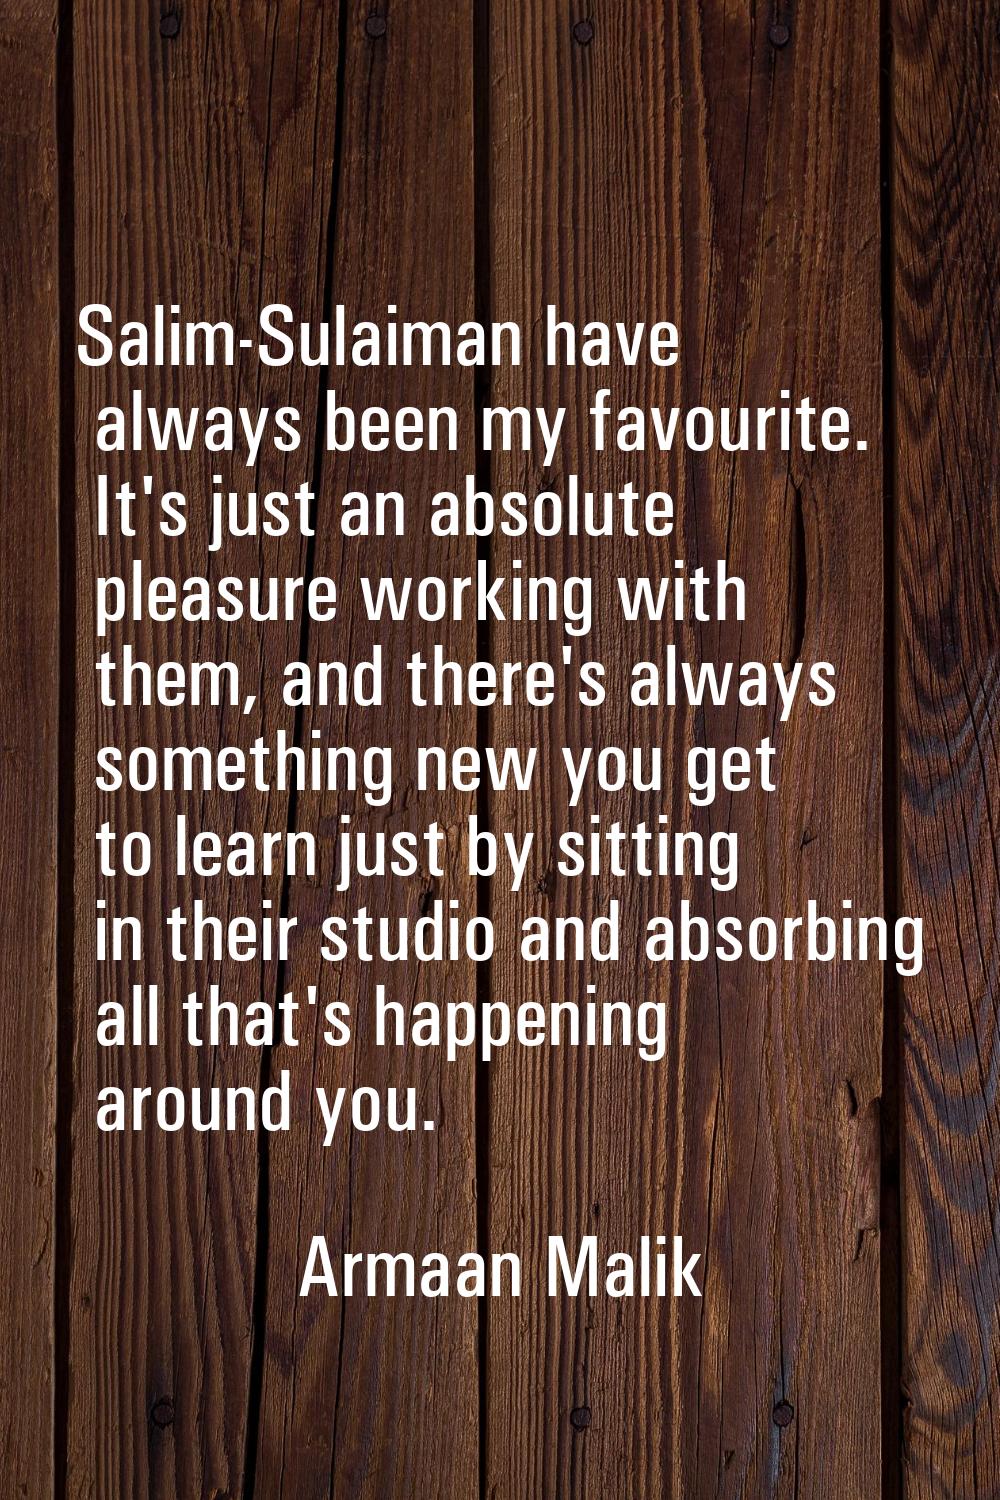 Salim-Sulaiman have always been my favourite. It's just an absolute pleasure working with them, and